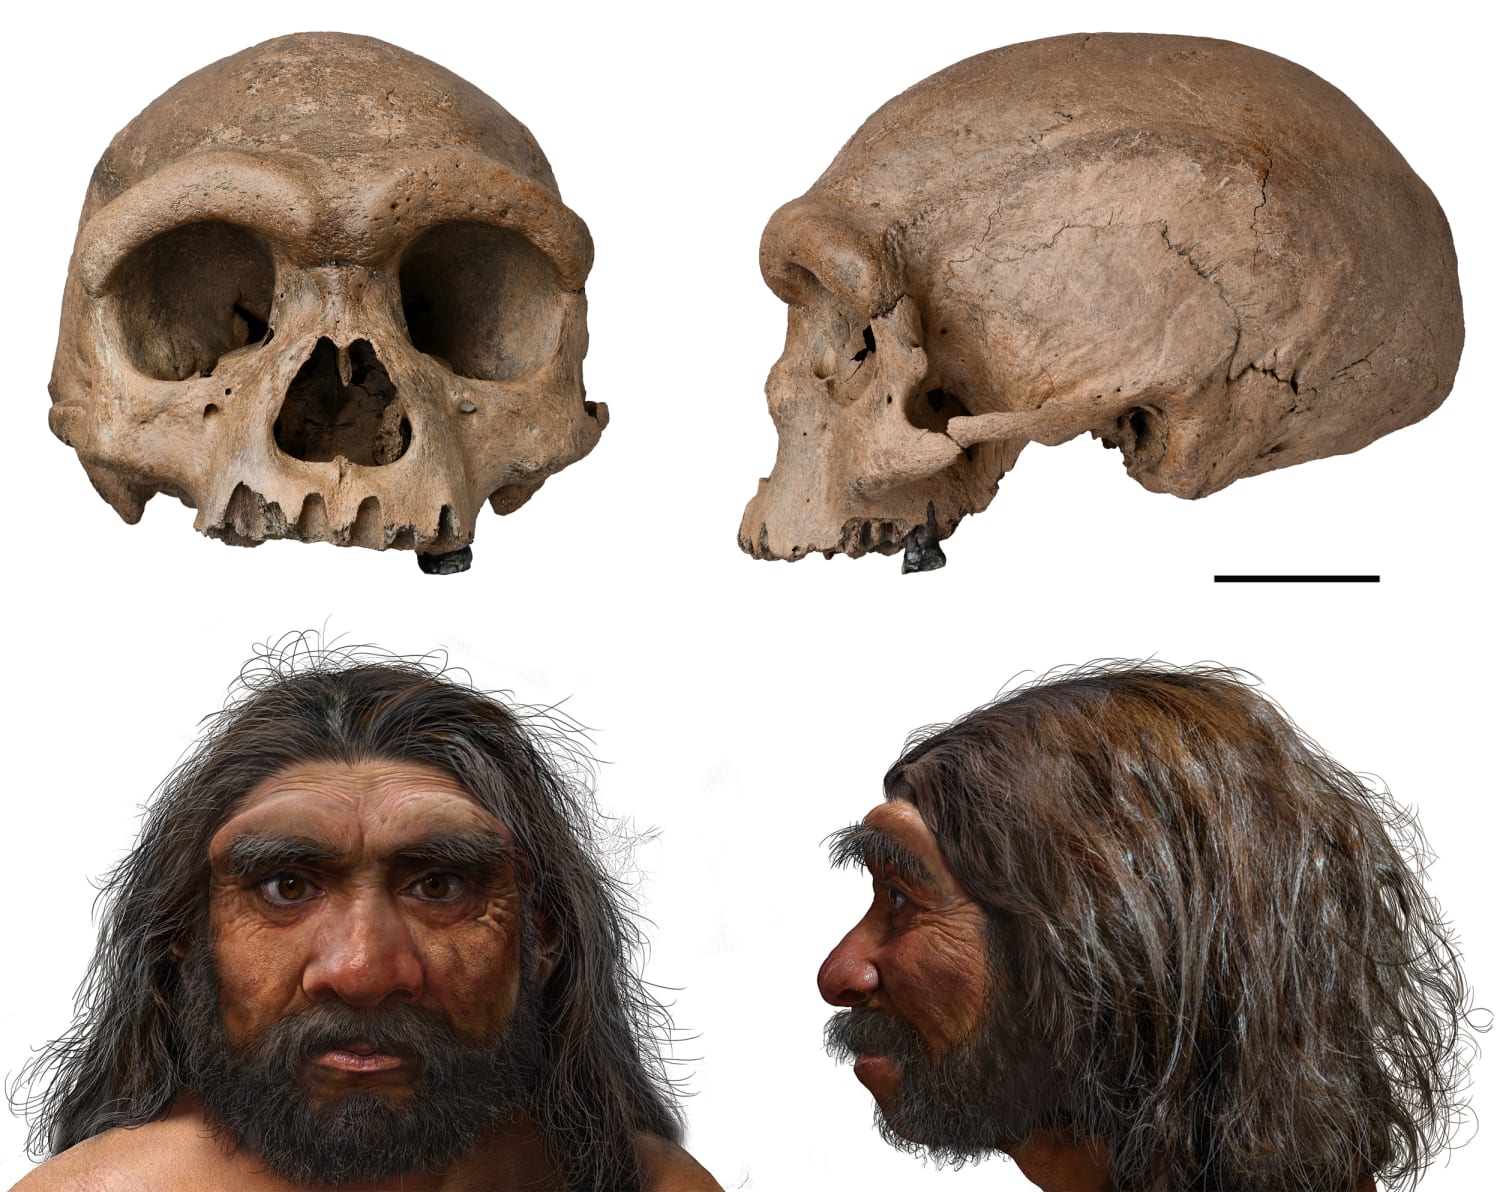 Discovery Of Dragon Man Skull In China Prompts Rethink Of Human Evolution